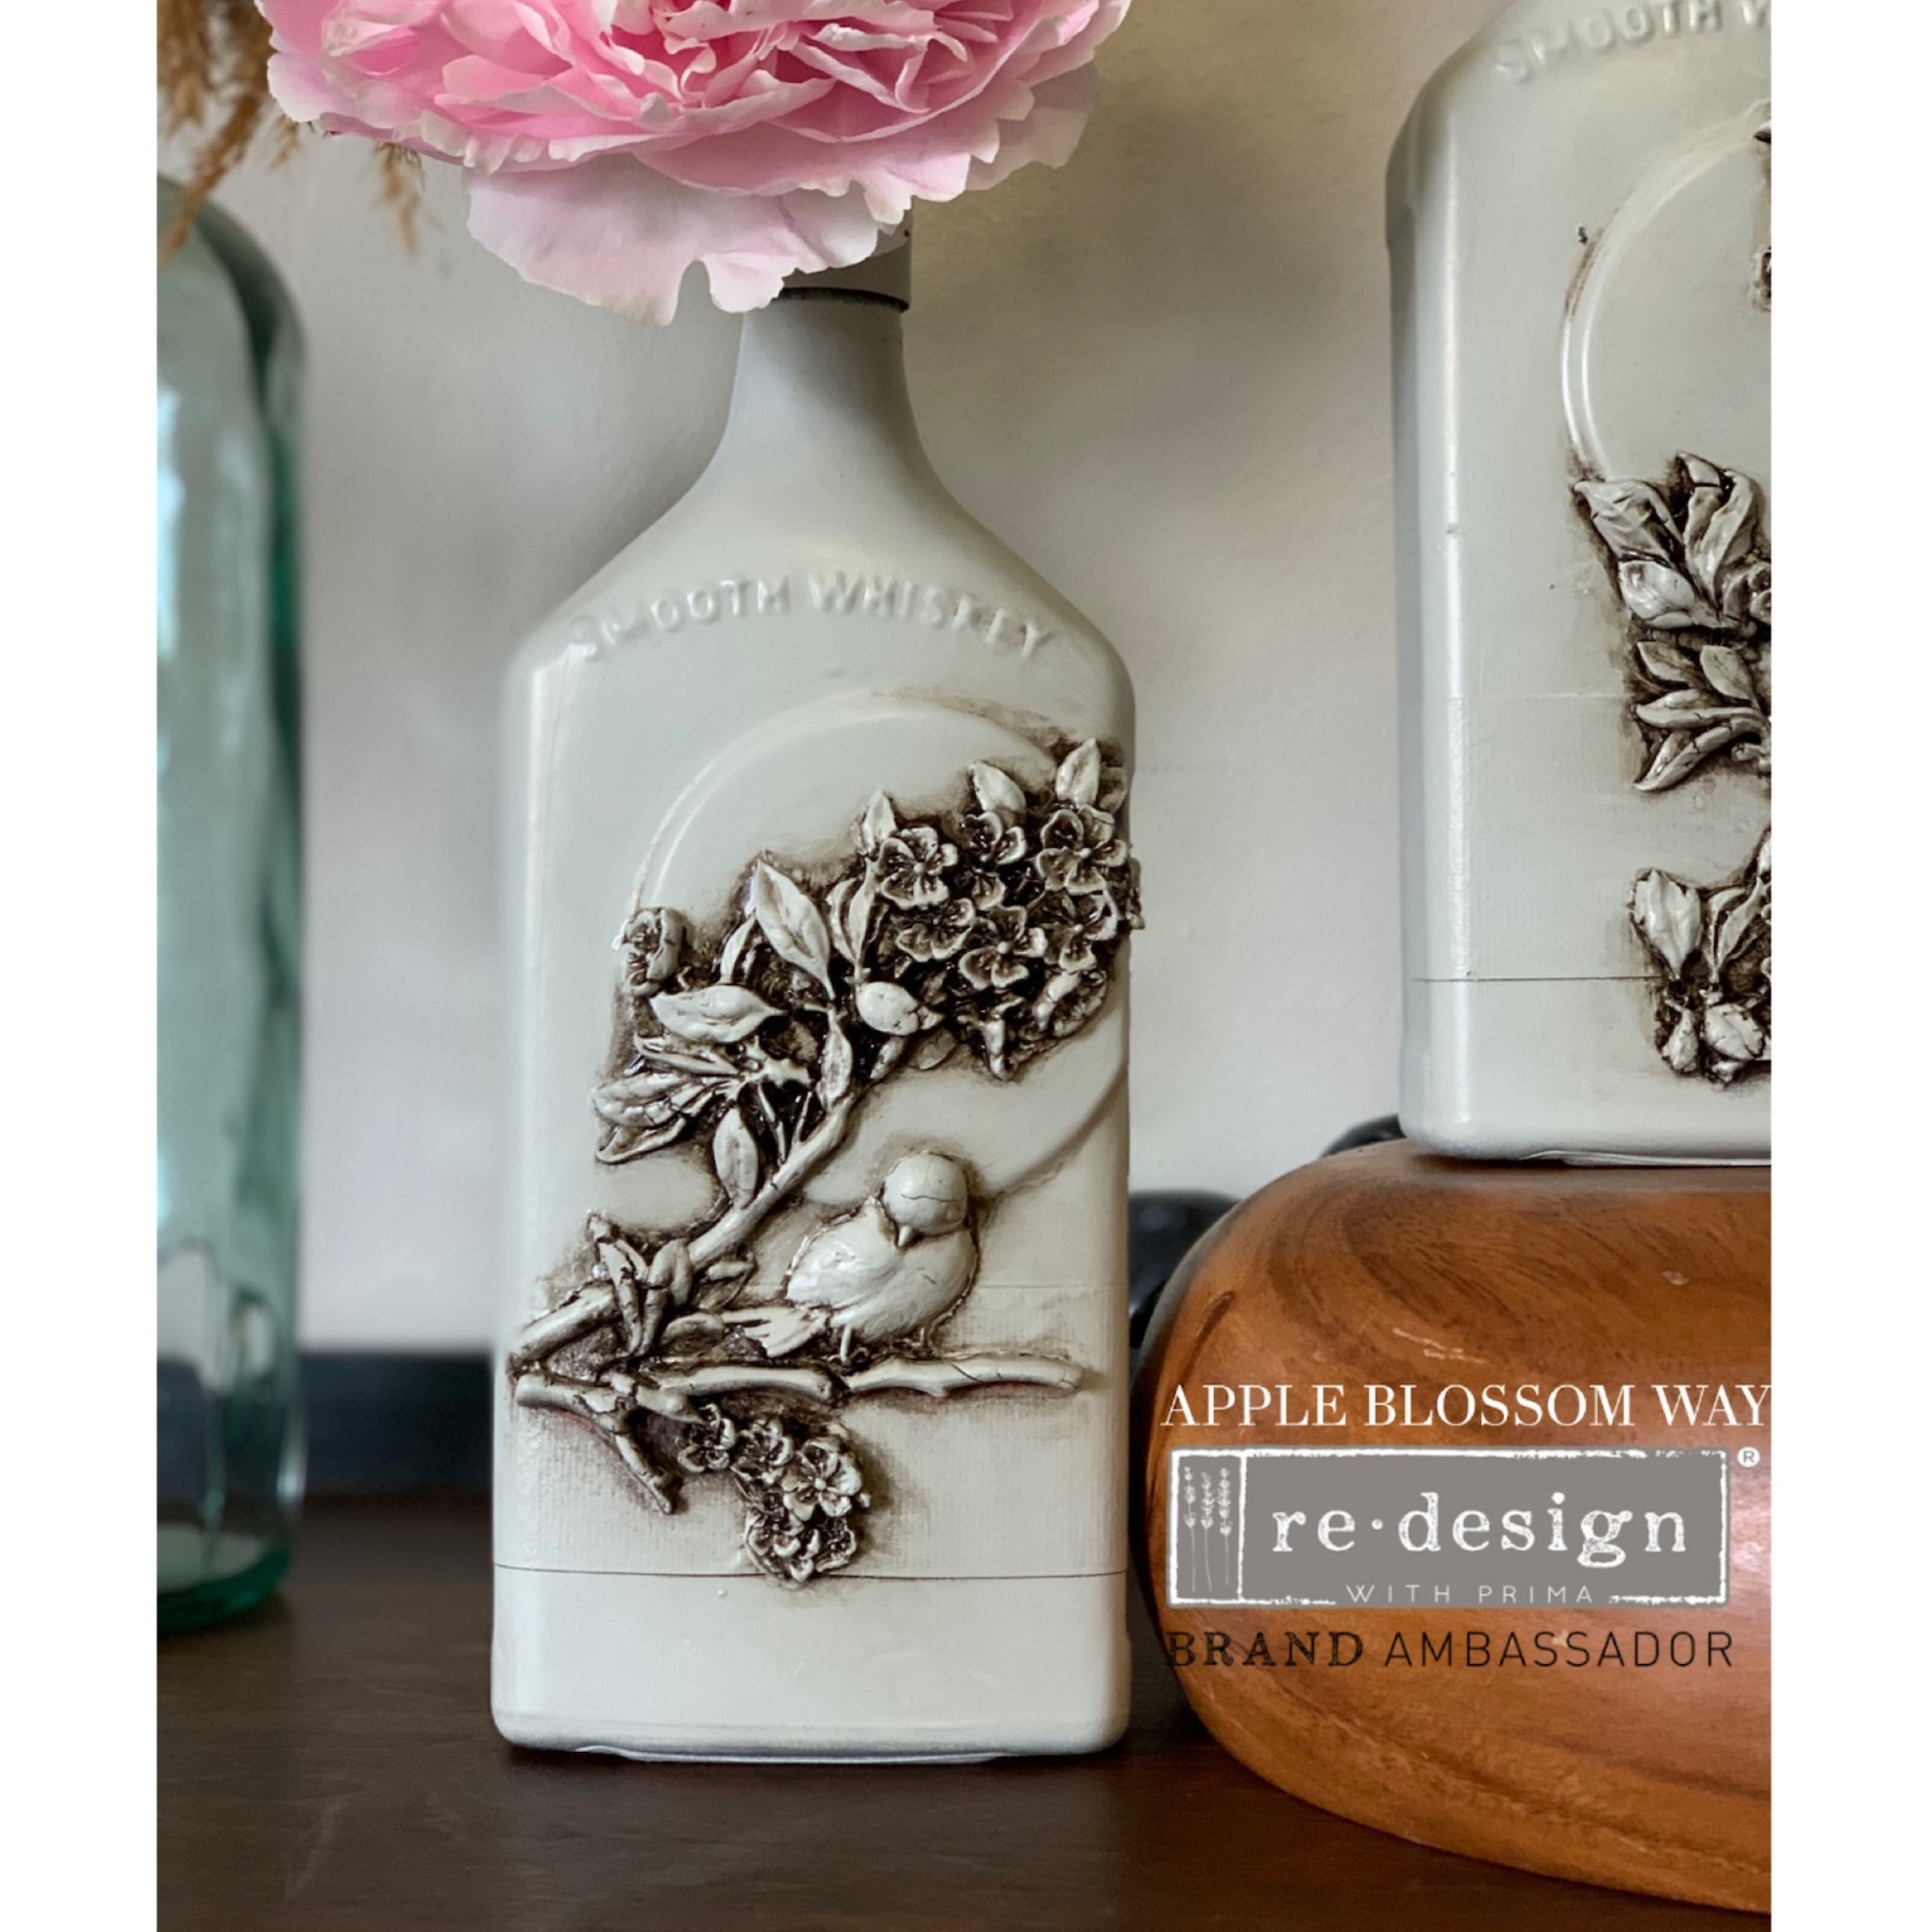 A vintage smooth whiskey bottle refurbished by Apple Blossom Way, a ReDesign with Prima Brand Ambassador, is painted white and features the Aviary silicon mould on it.